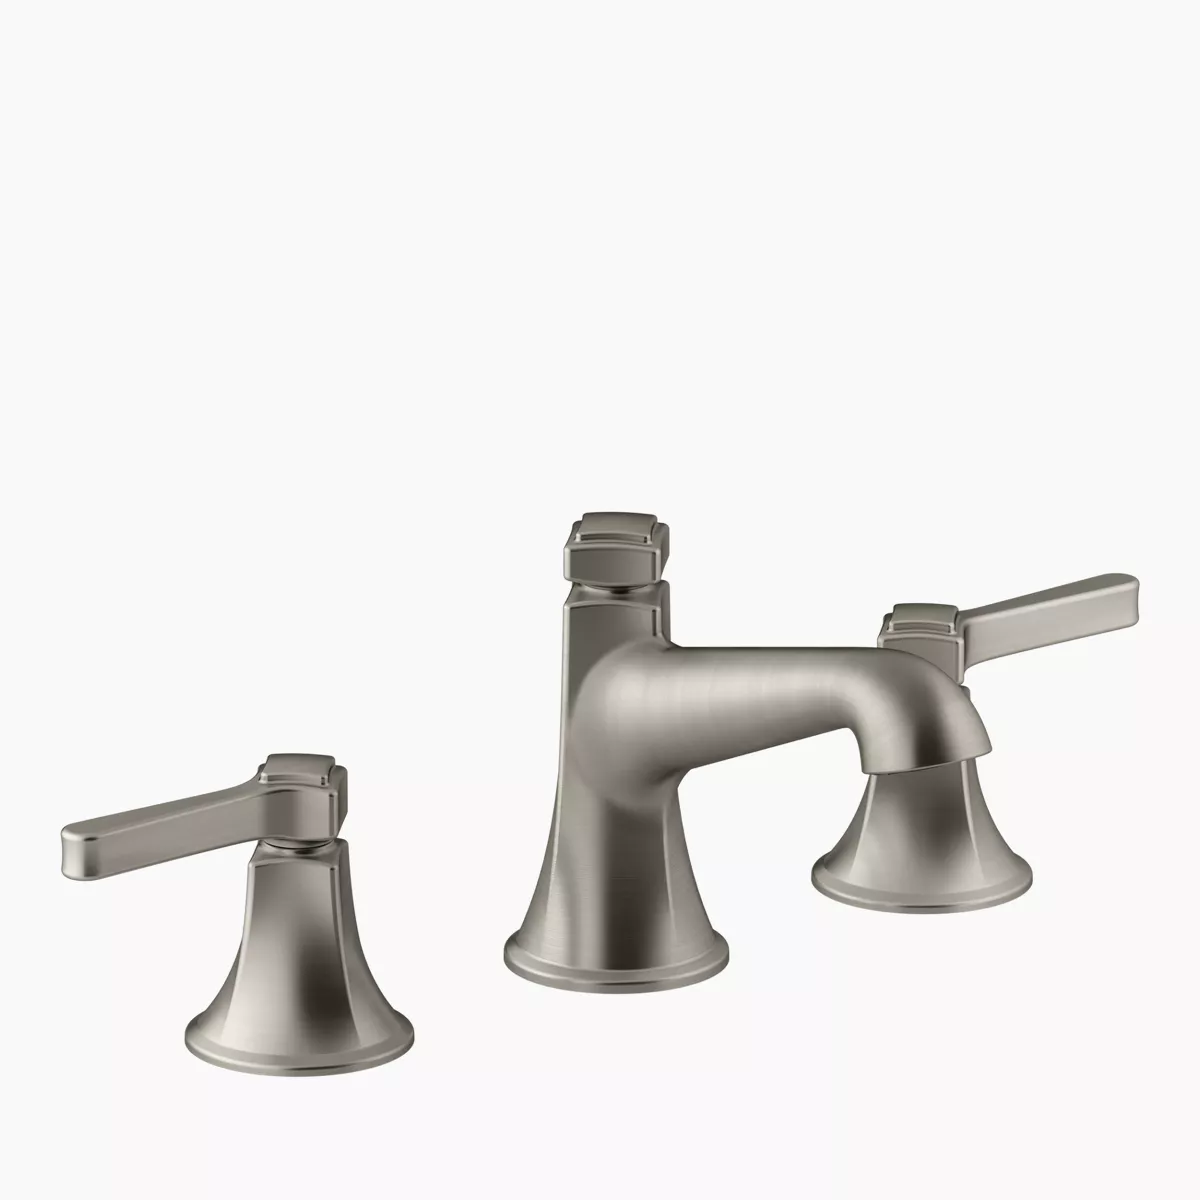 KOHLER | K-14407-4 | Purist Widespread Sink Faucet with High Lever